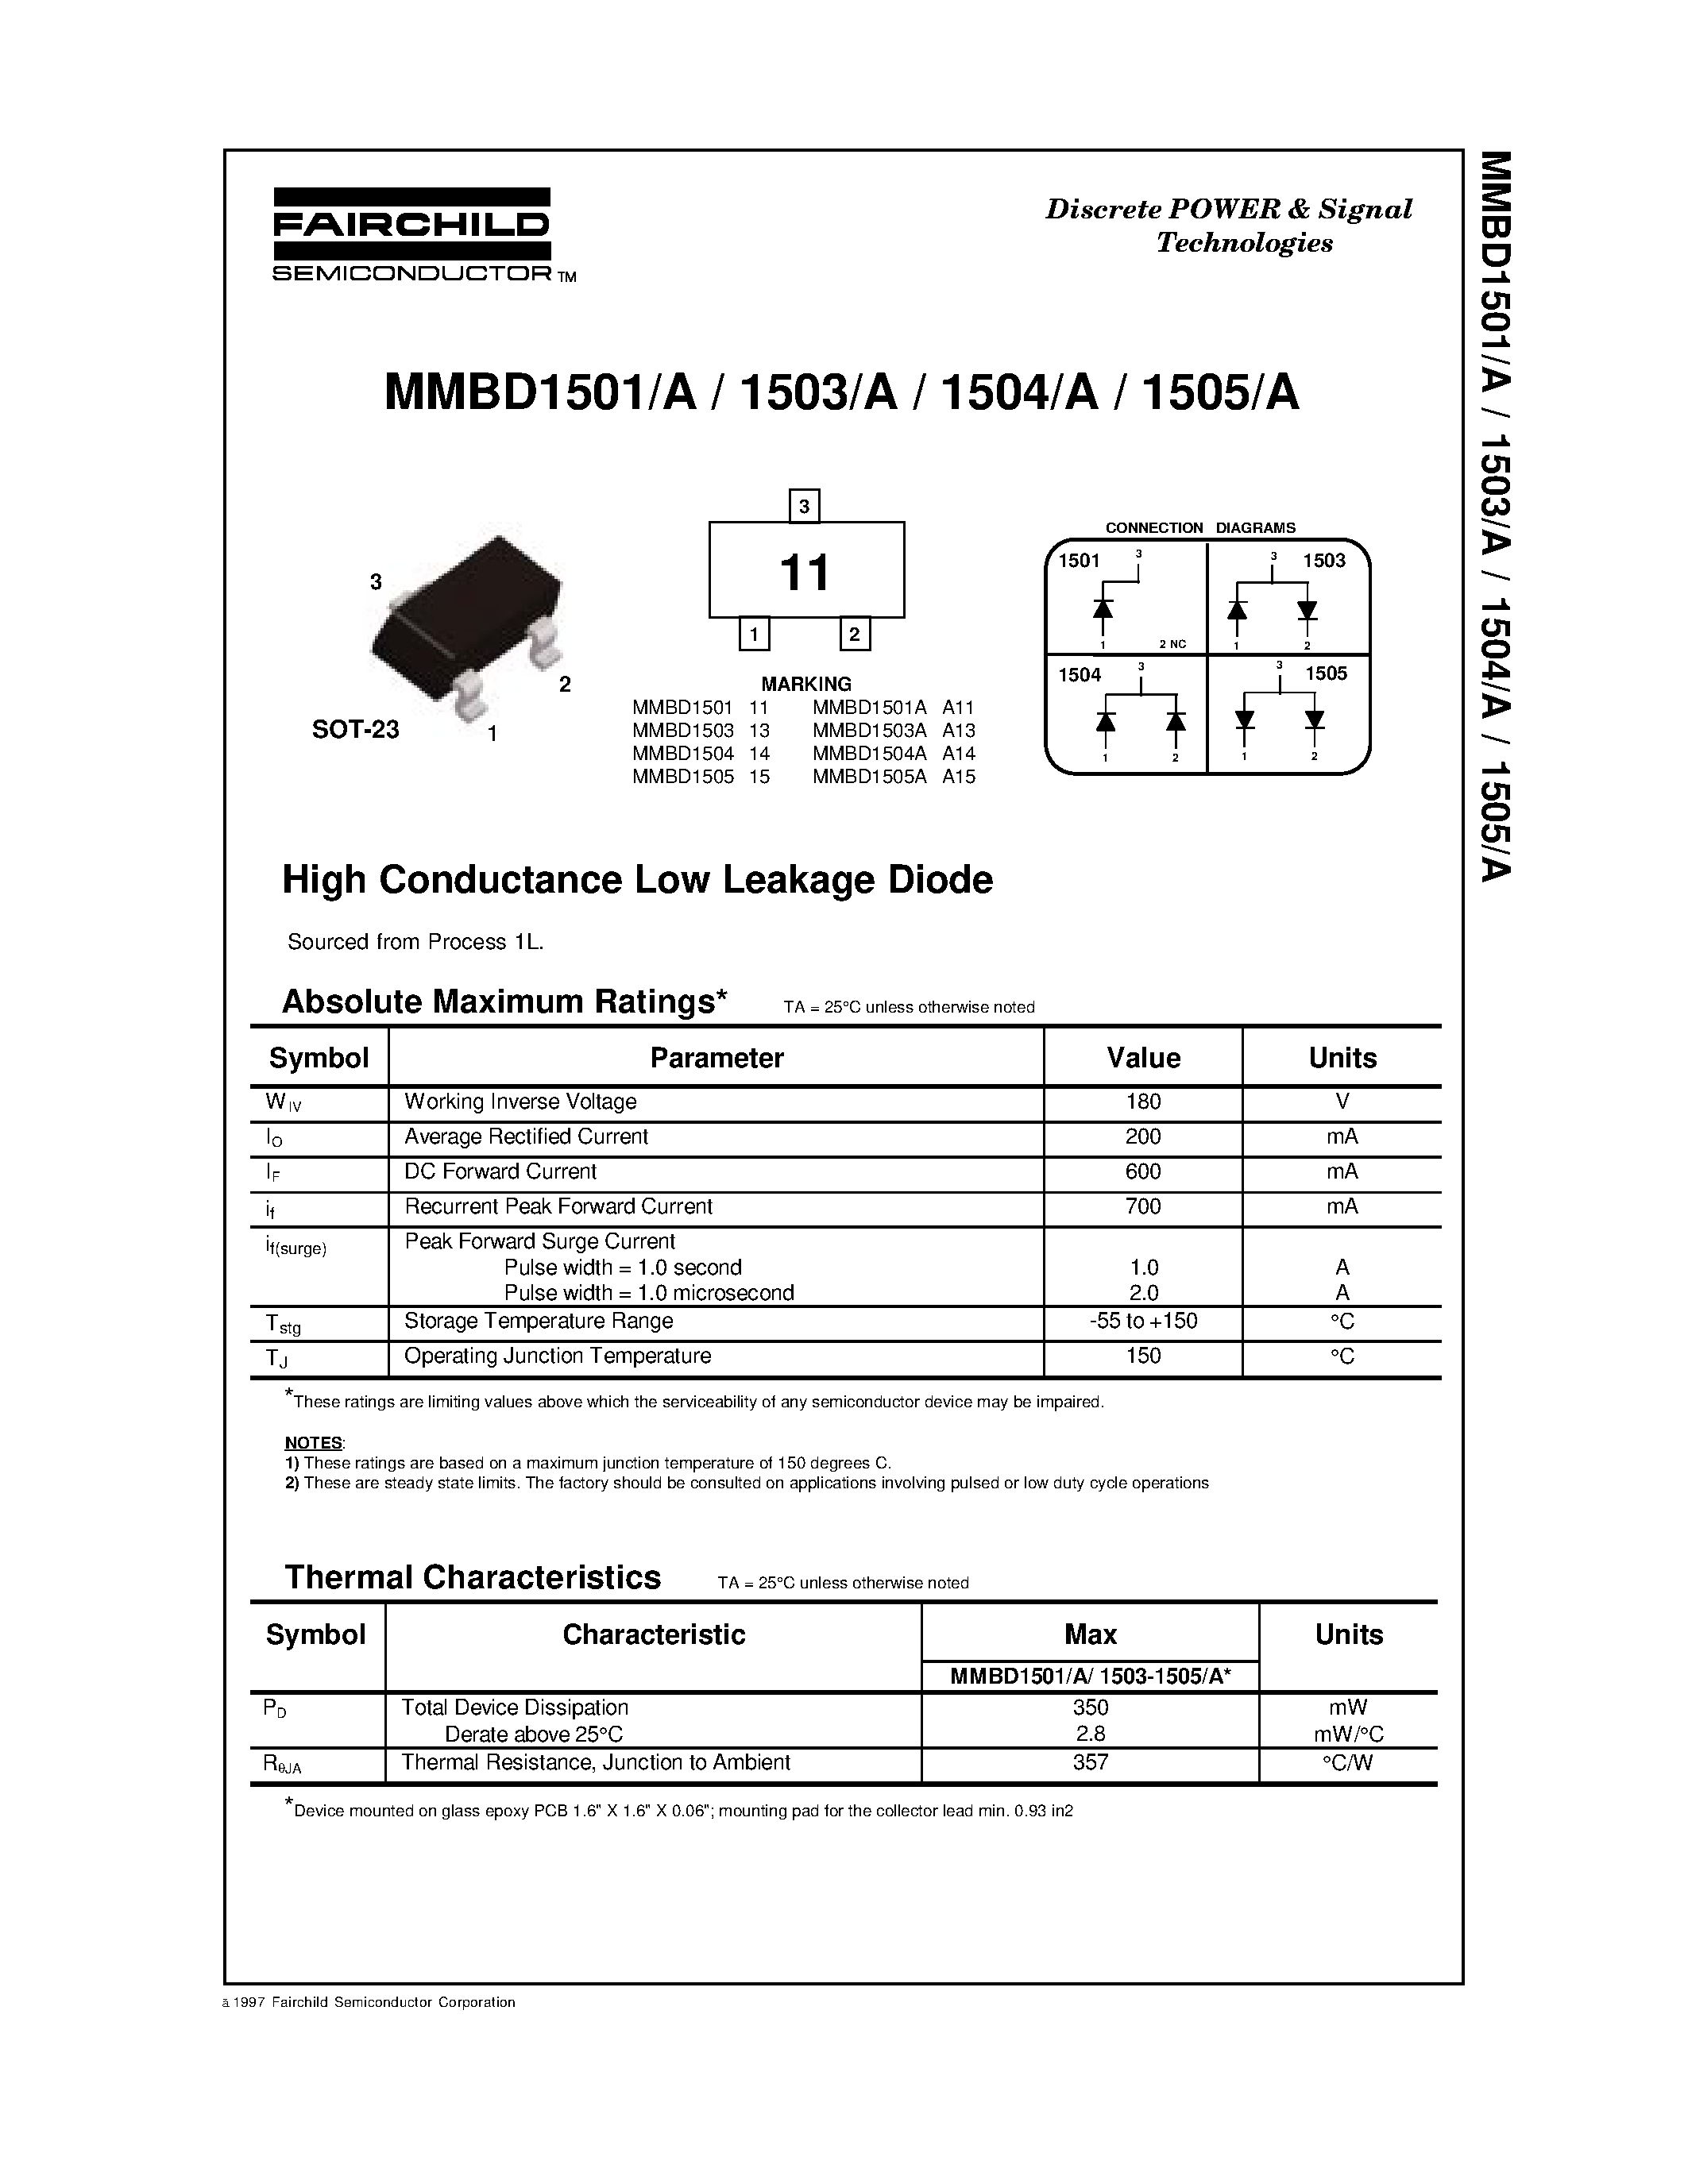 Datasheet MMBD1501A - High Conductance Low Leakage Diode page 1